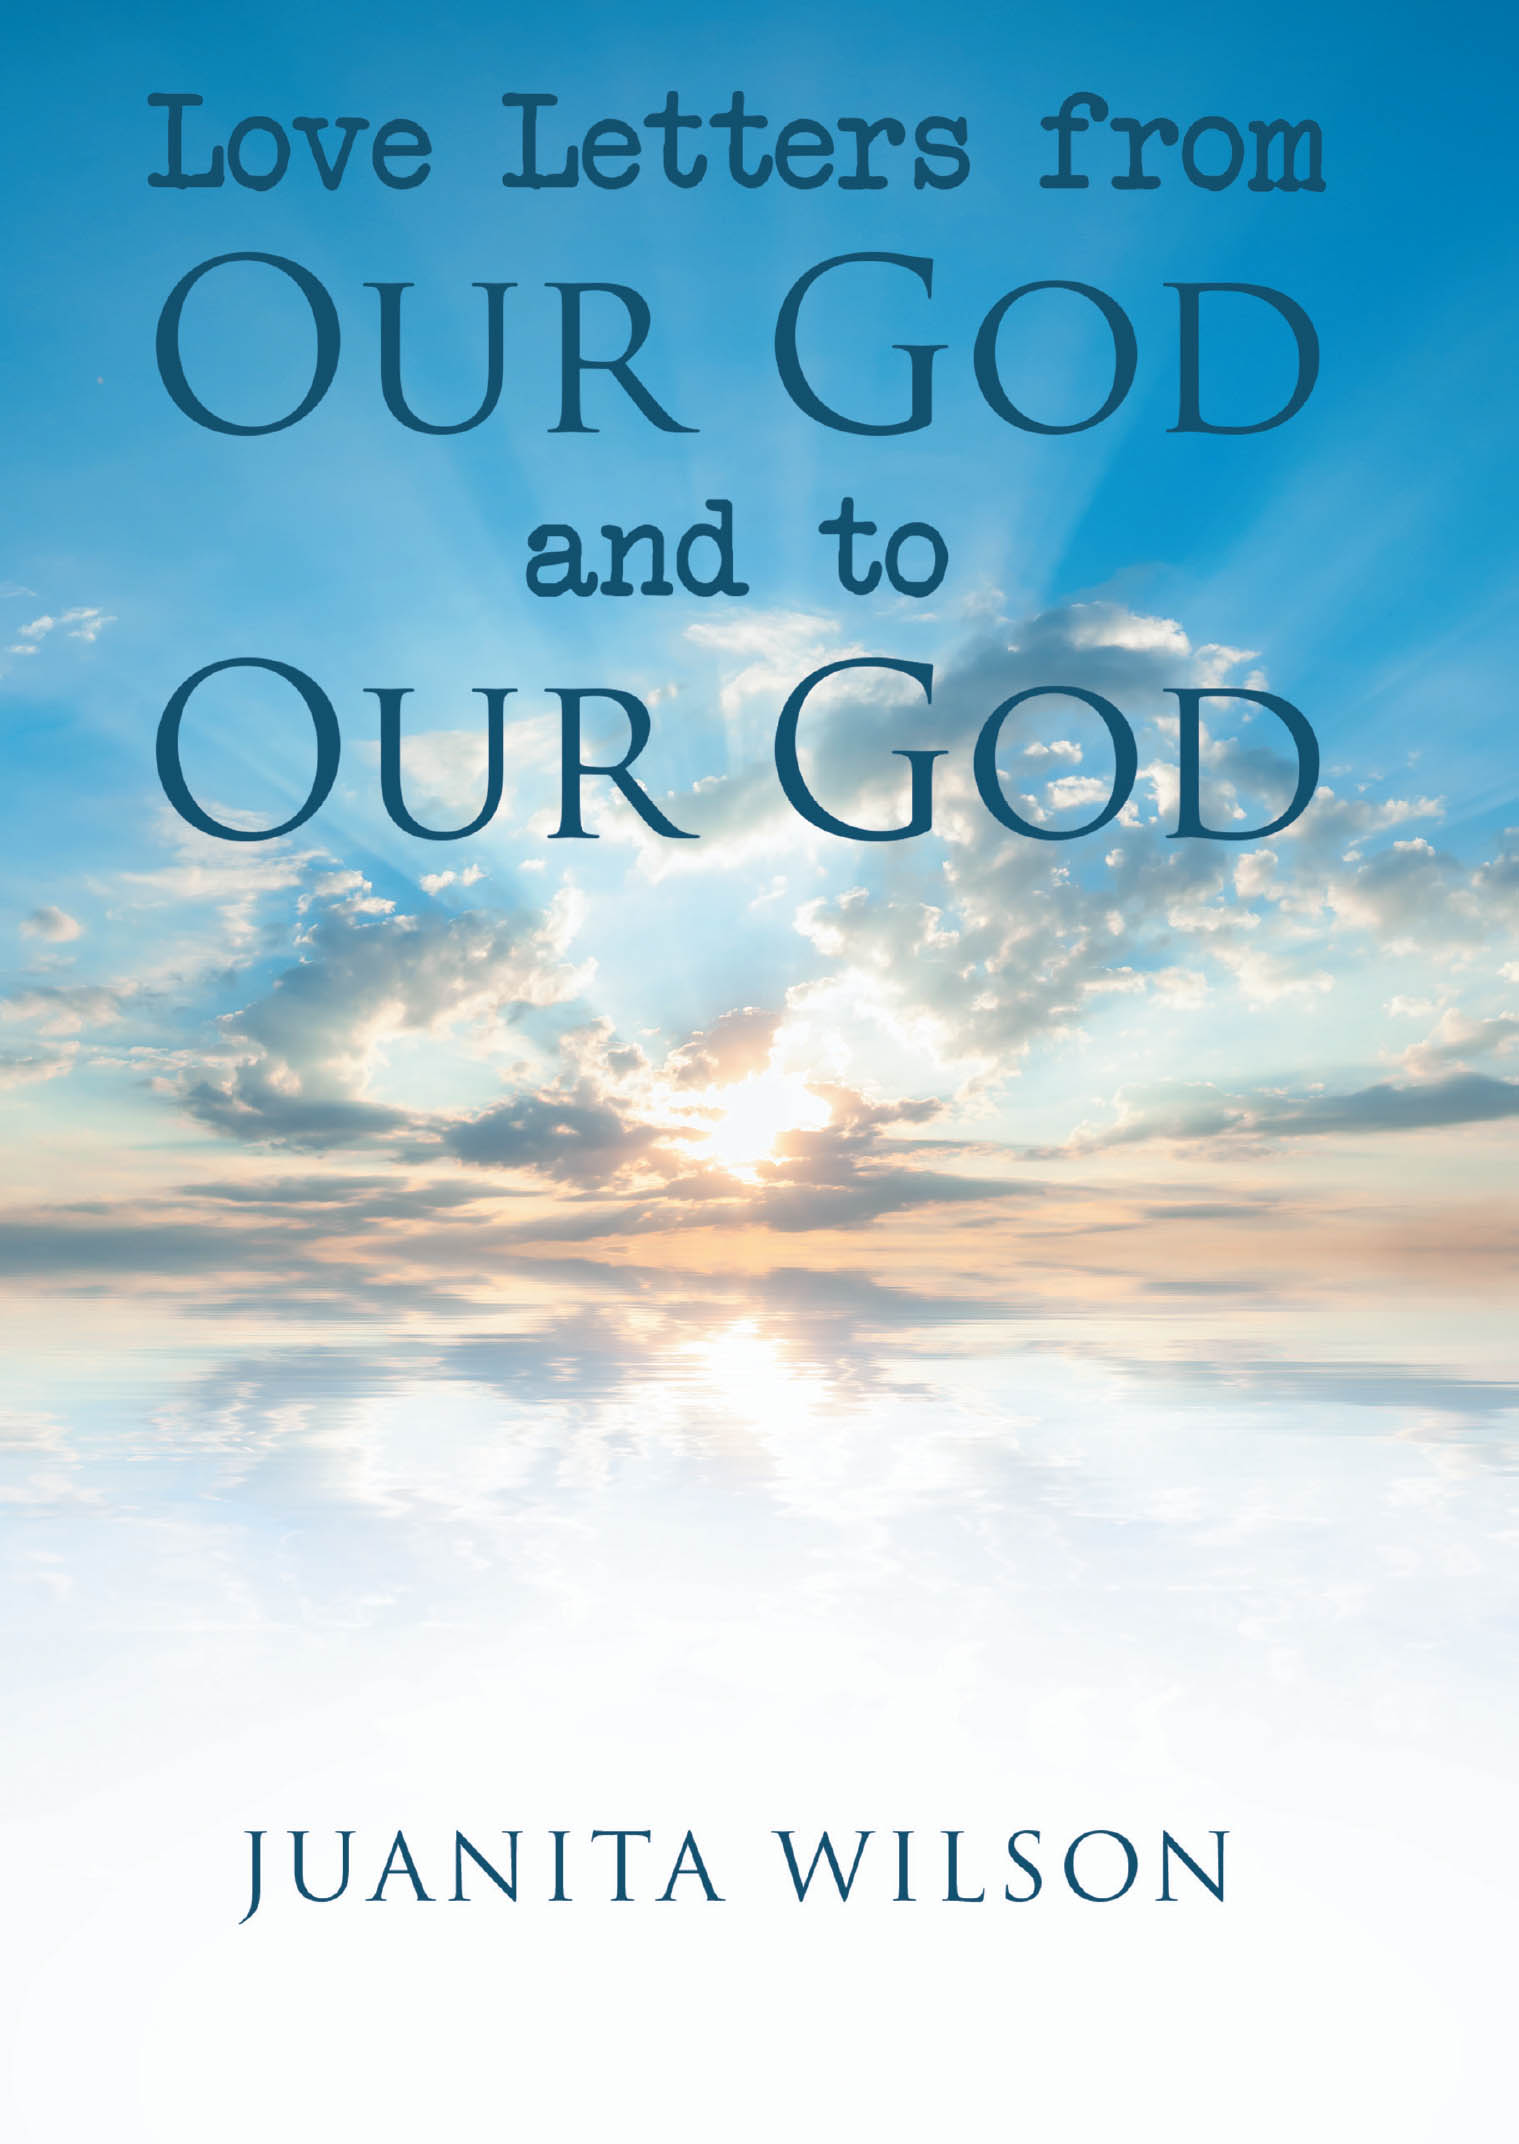 Juanita Wilson’s Newly Released “Love Letters from Our God and to Our God” is a Heartwarming Testament to Divine Love